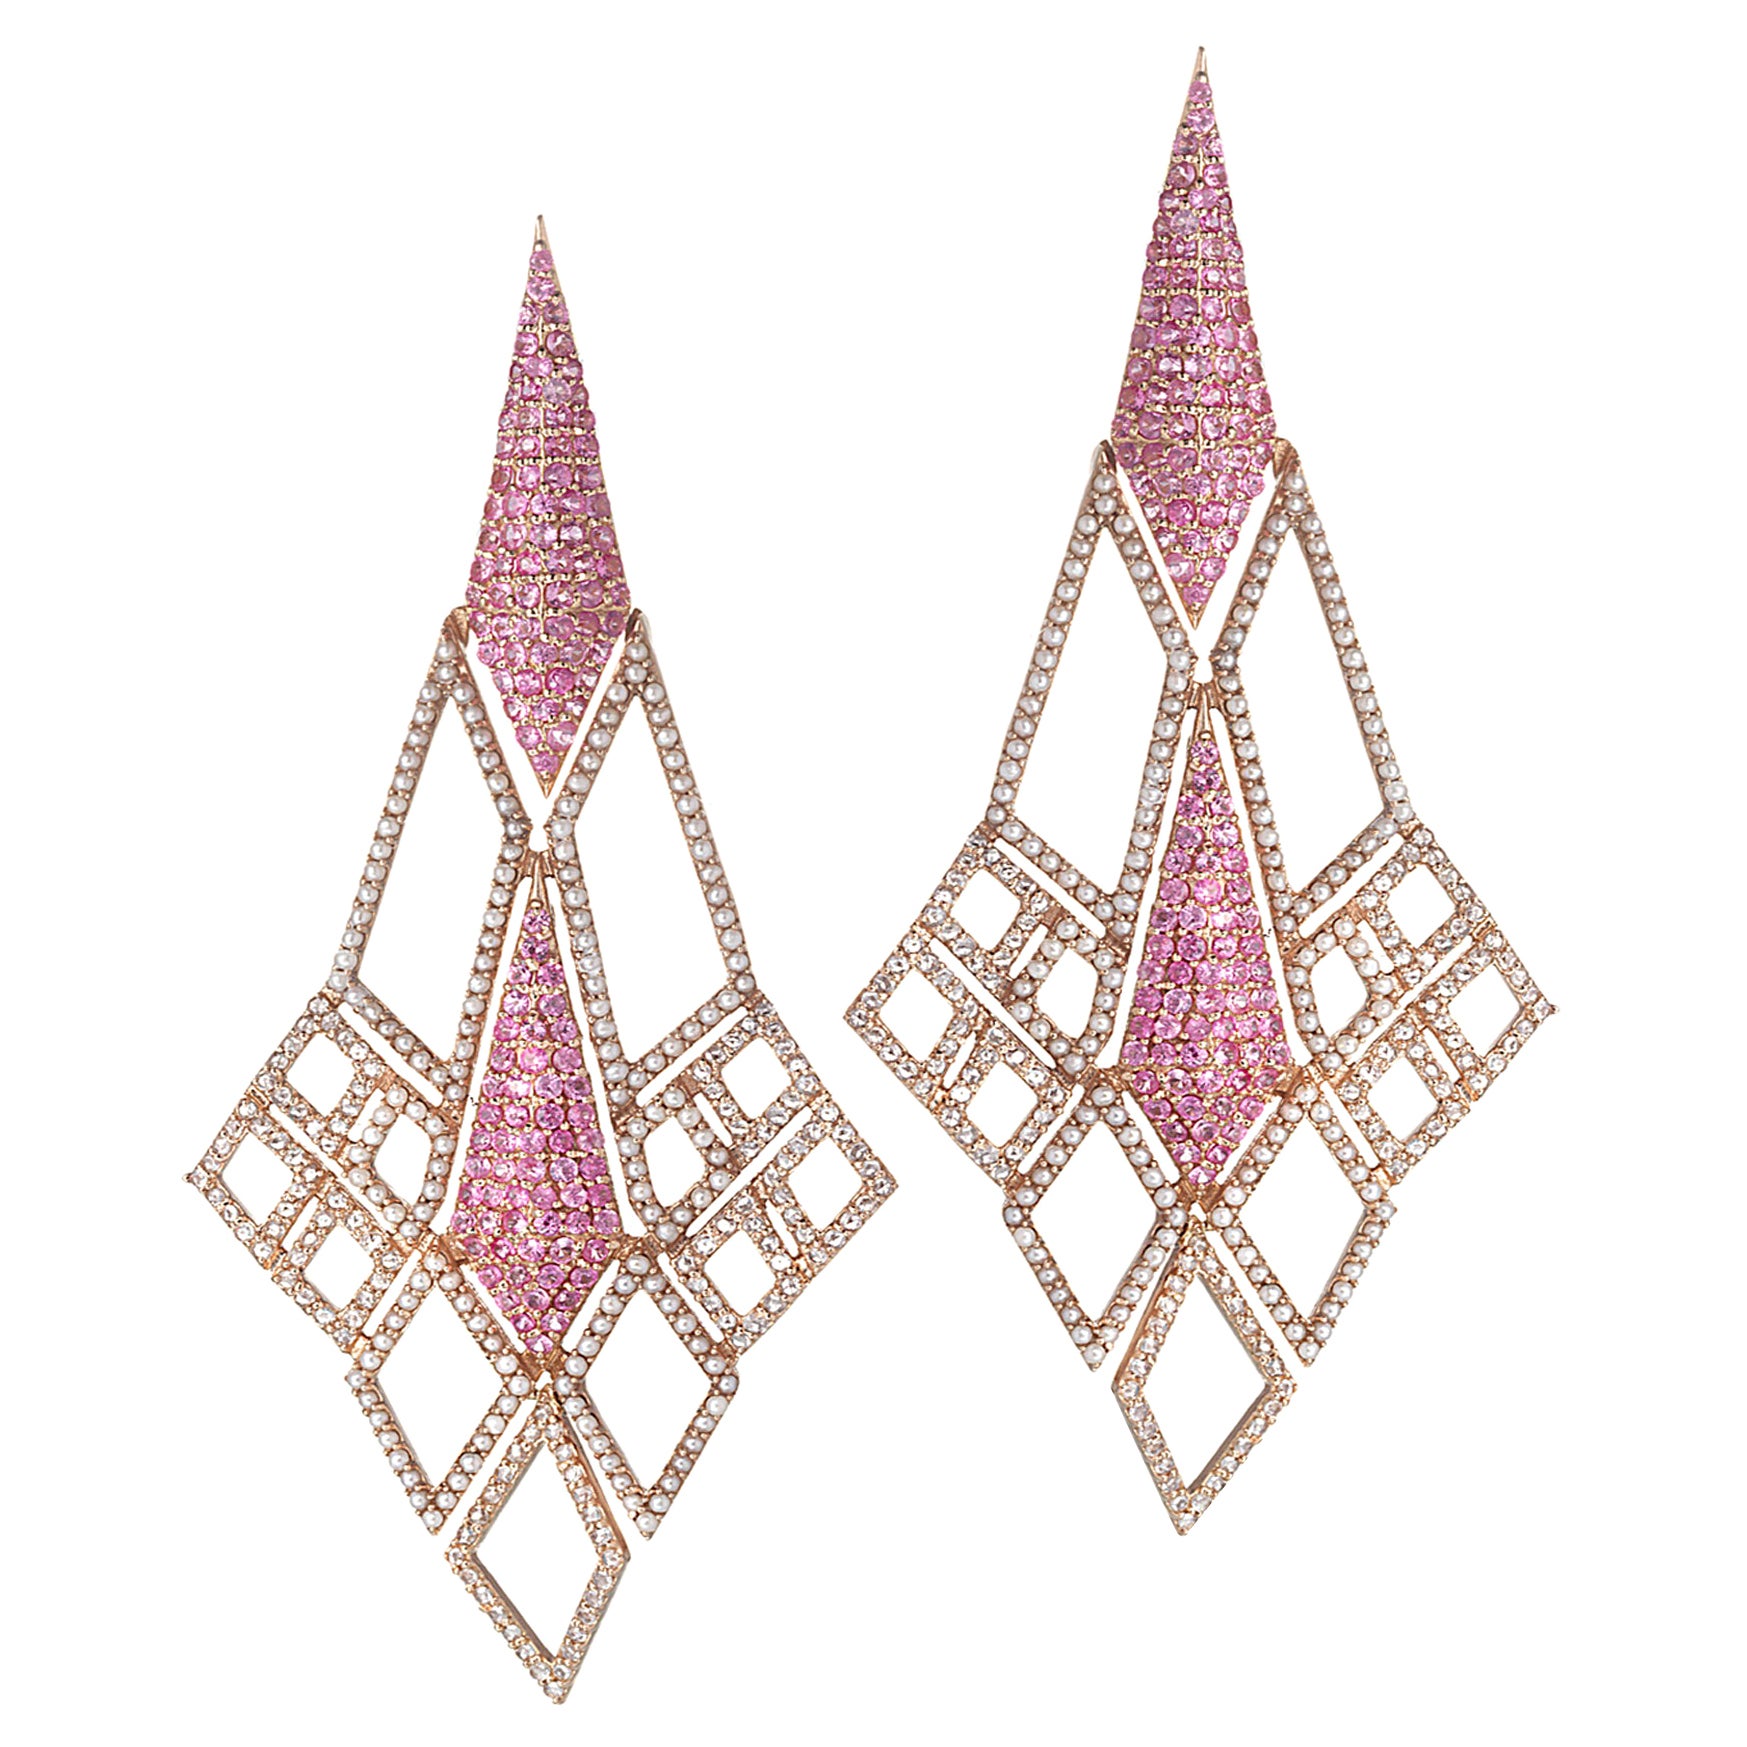 Sagrada Glory Earring in 18K Rose Gold with Pink Sapphire and Pearls